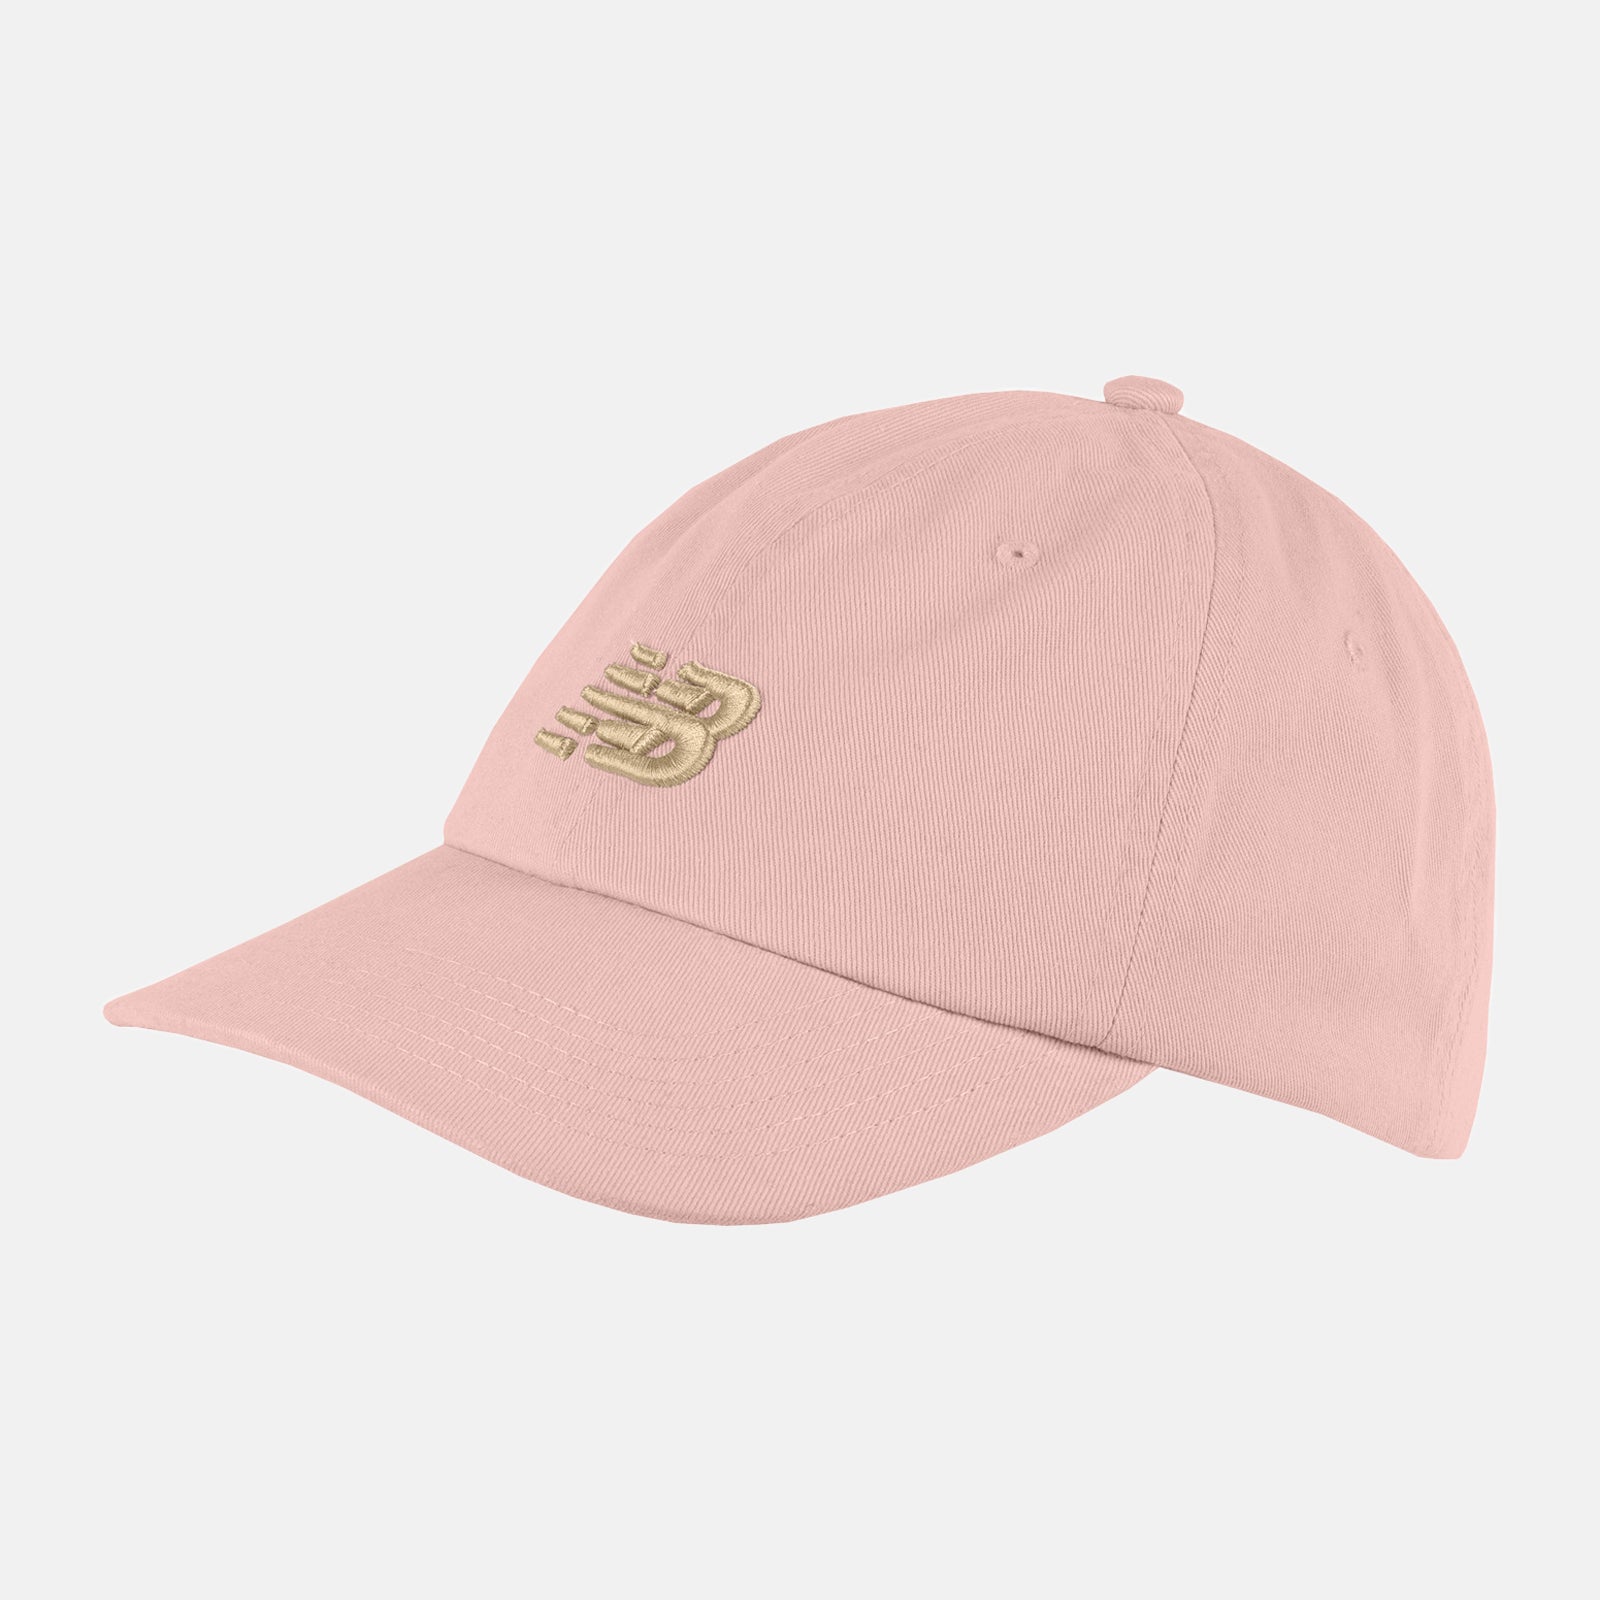 NEW BALANCE Kid's Classic Hat in Light Pink LAH03002 O/S LIGHT PINK FROM EIGHTYWINGOLD - OFFICIAL BRAND PARTNER